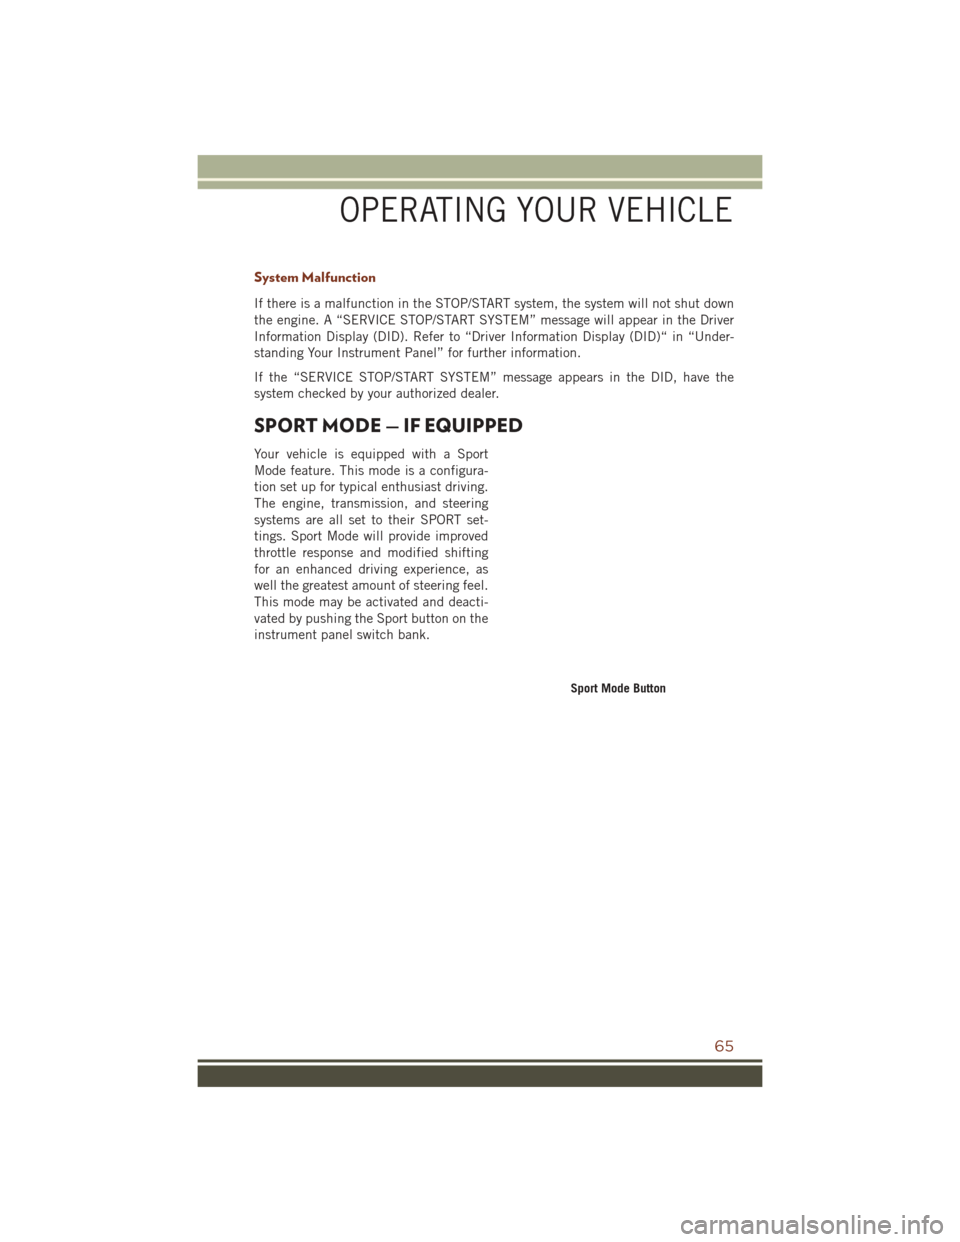 JEEP GRAND CHEROKEE 2016 WK2 / 4.G User Guide System Malfunction
If there is a malfunction in the STOP/START system, the system will not shut down
the engine. A “SERVICE STOP/START SYSTEM” message will appear in the Driver
Information Display